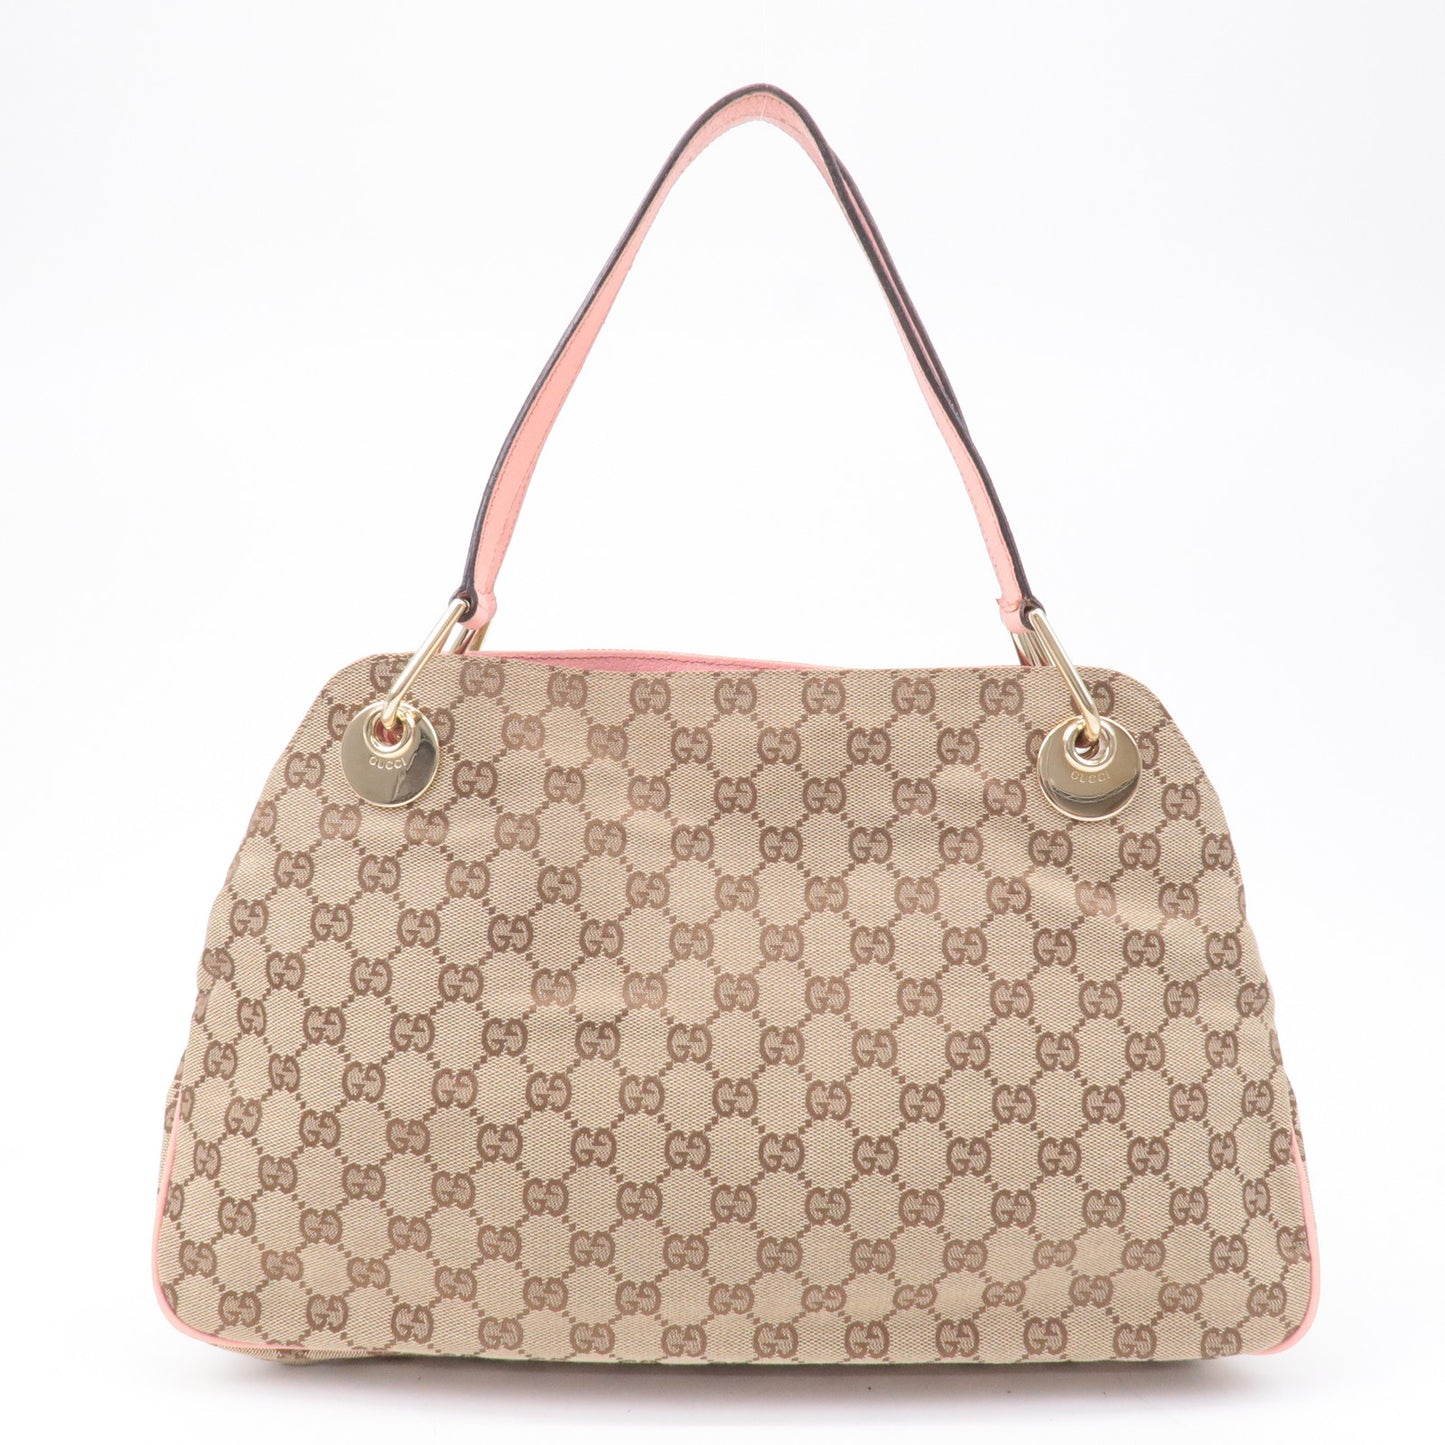 Gucci, Bags, Authentic Gucci Gg Monogram Tan And Pink Leather Eclipse Tote